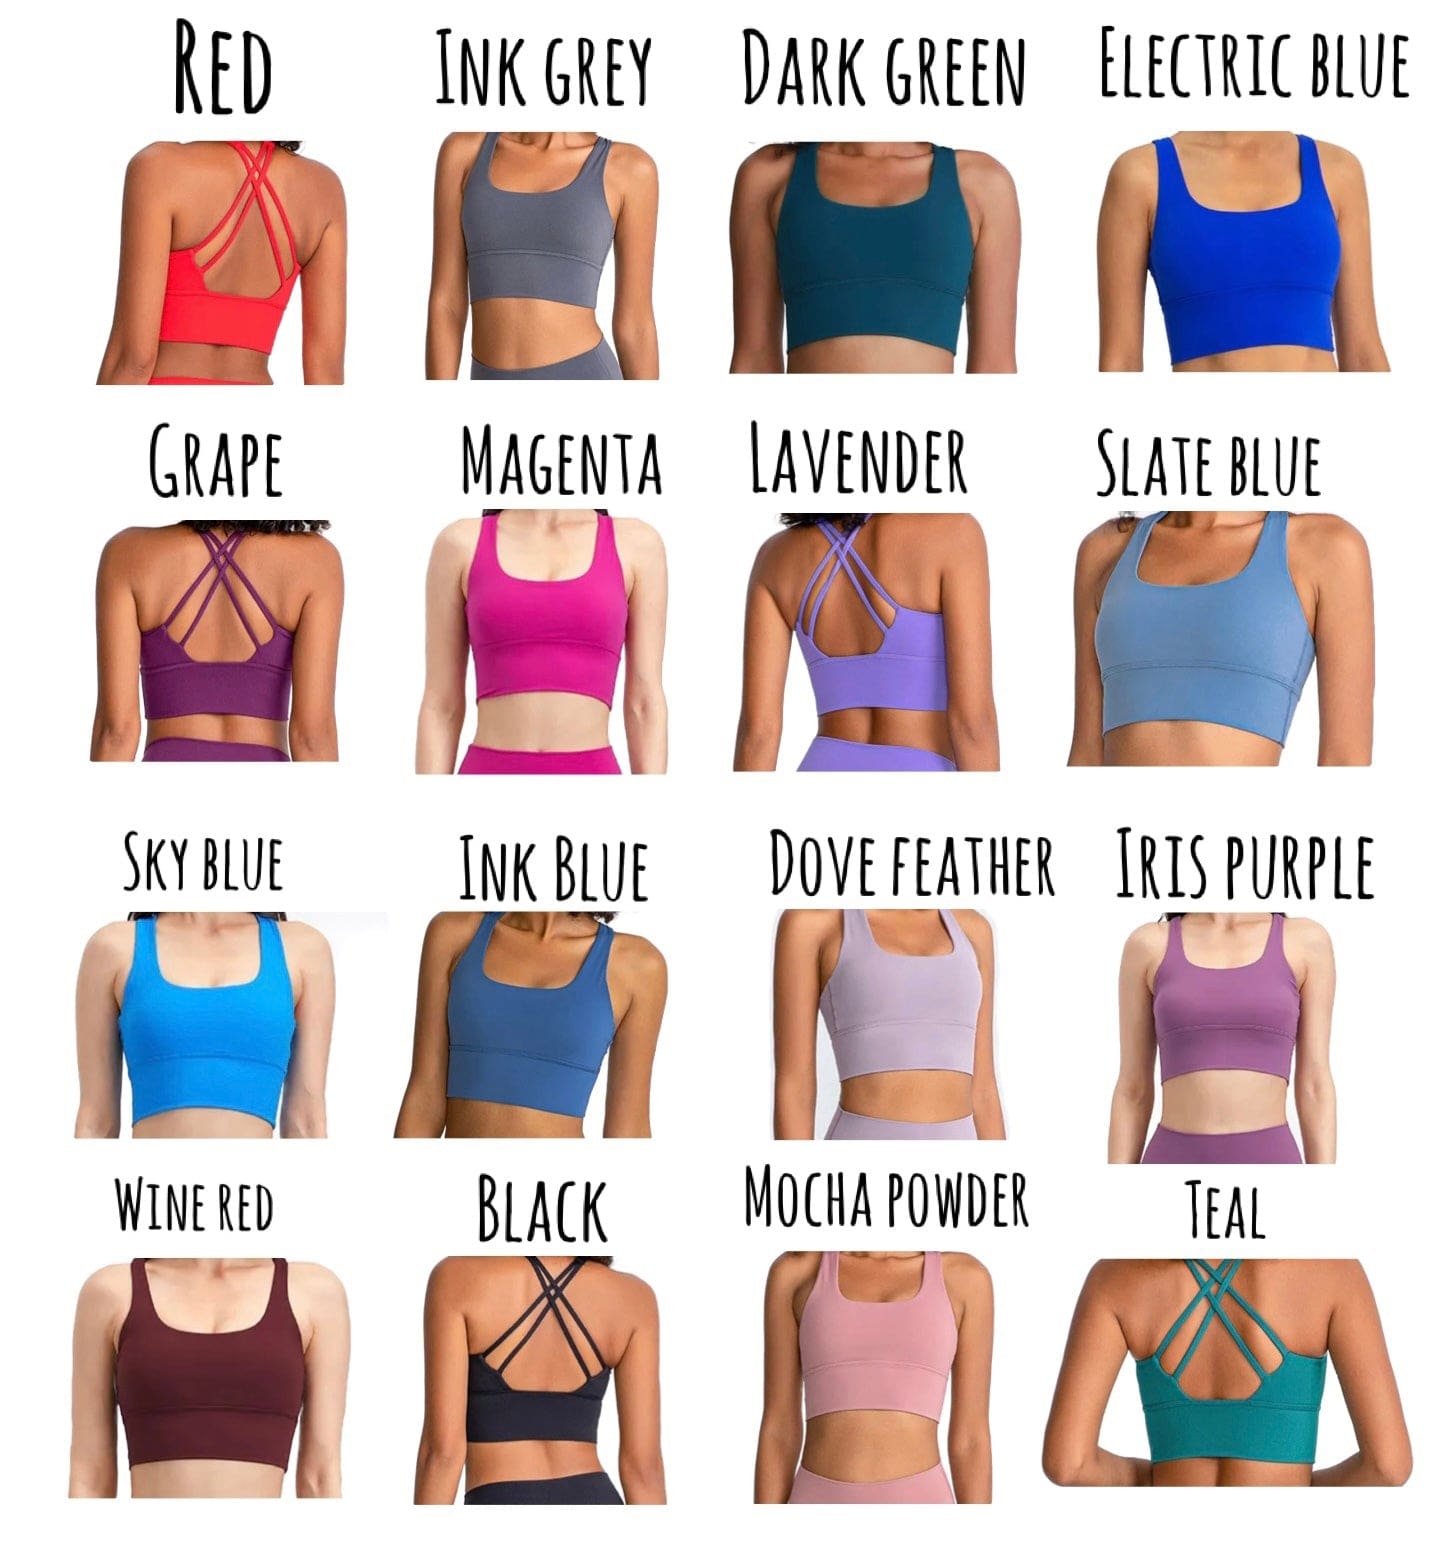 Energy longline bra (can be paired with Energy seamless leggings)